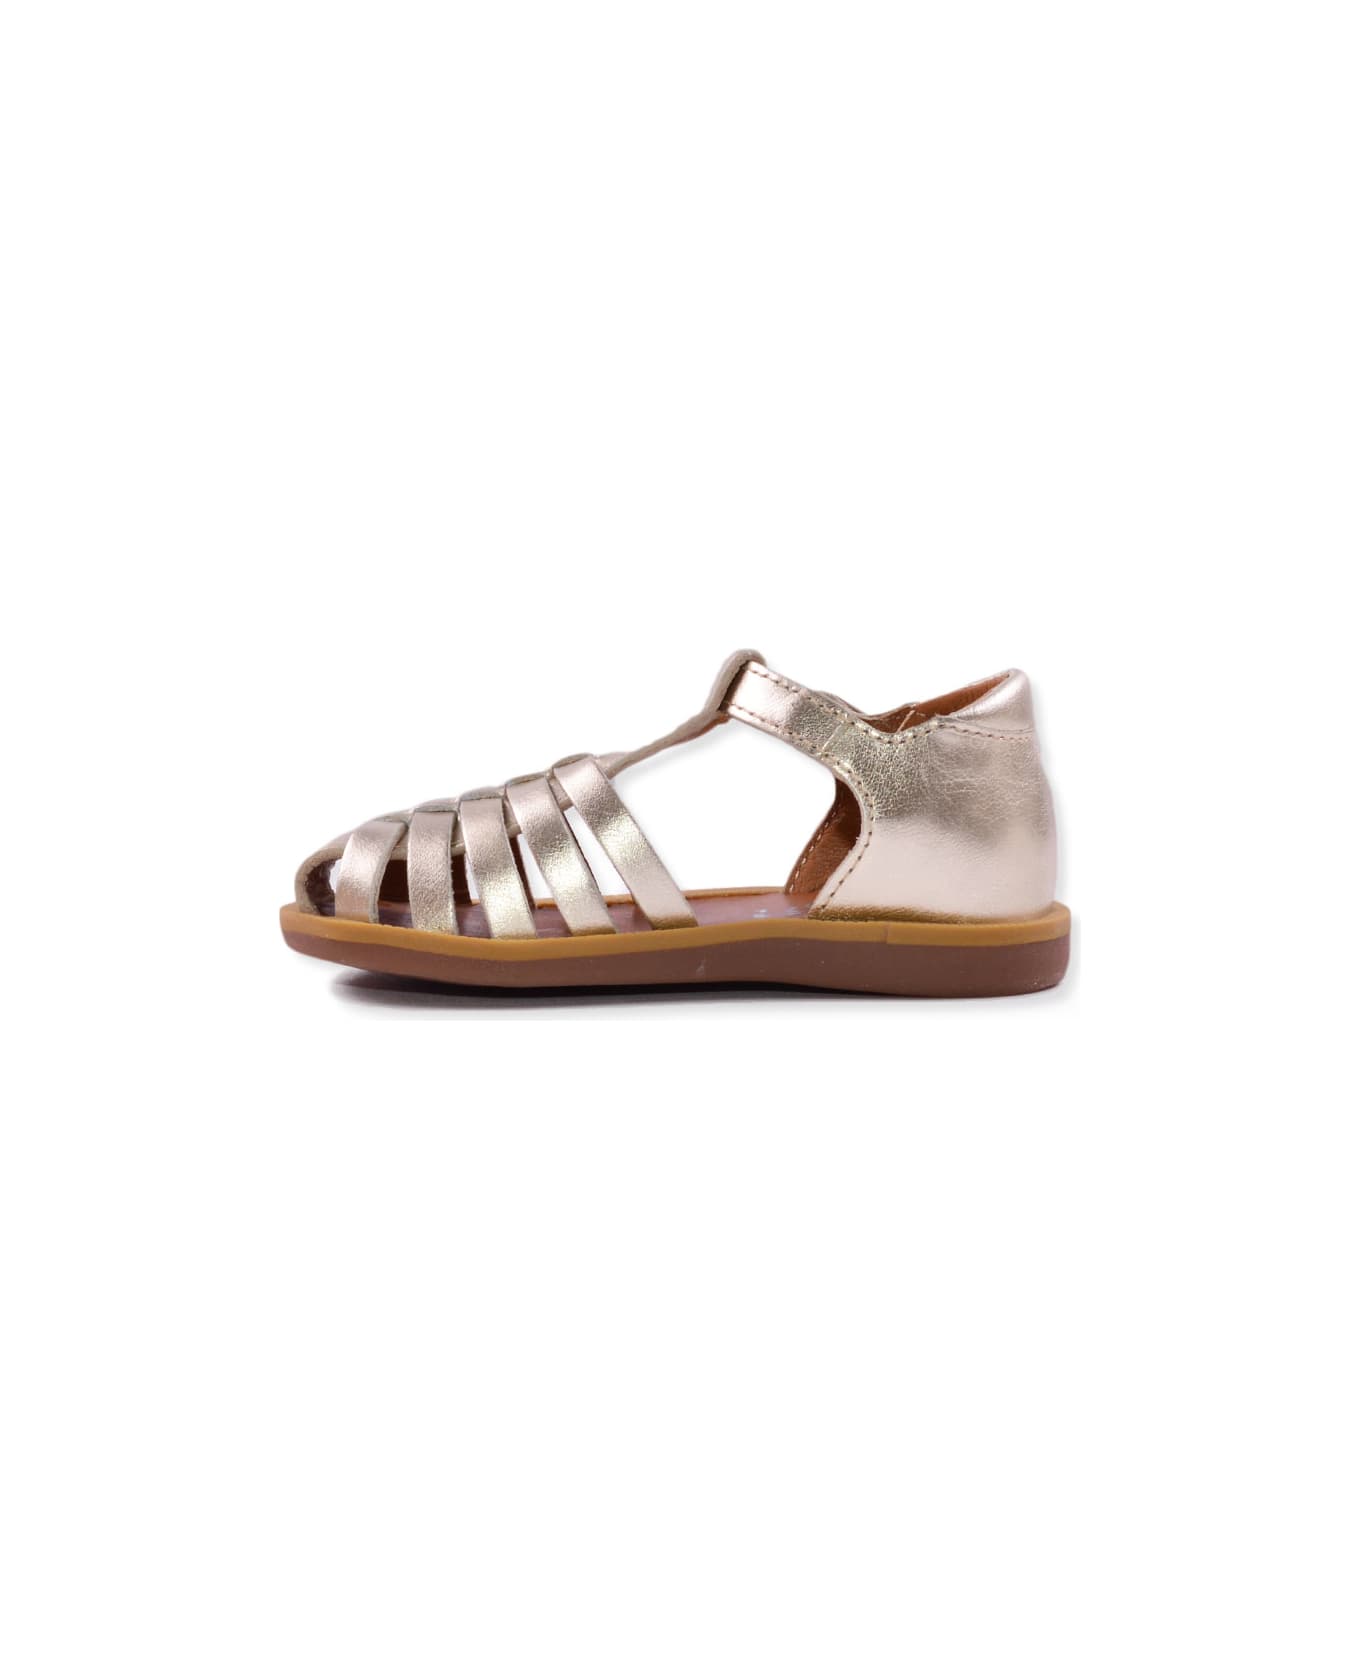 Pom d'Api Sandals In Changing Leather - Grey シューズ